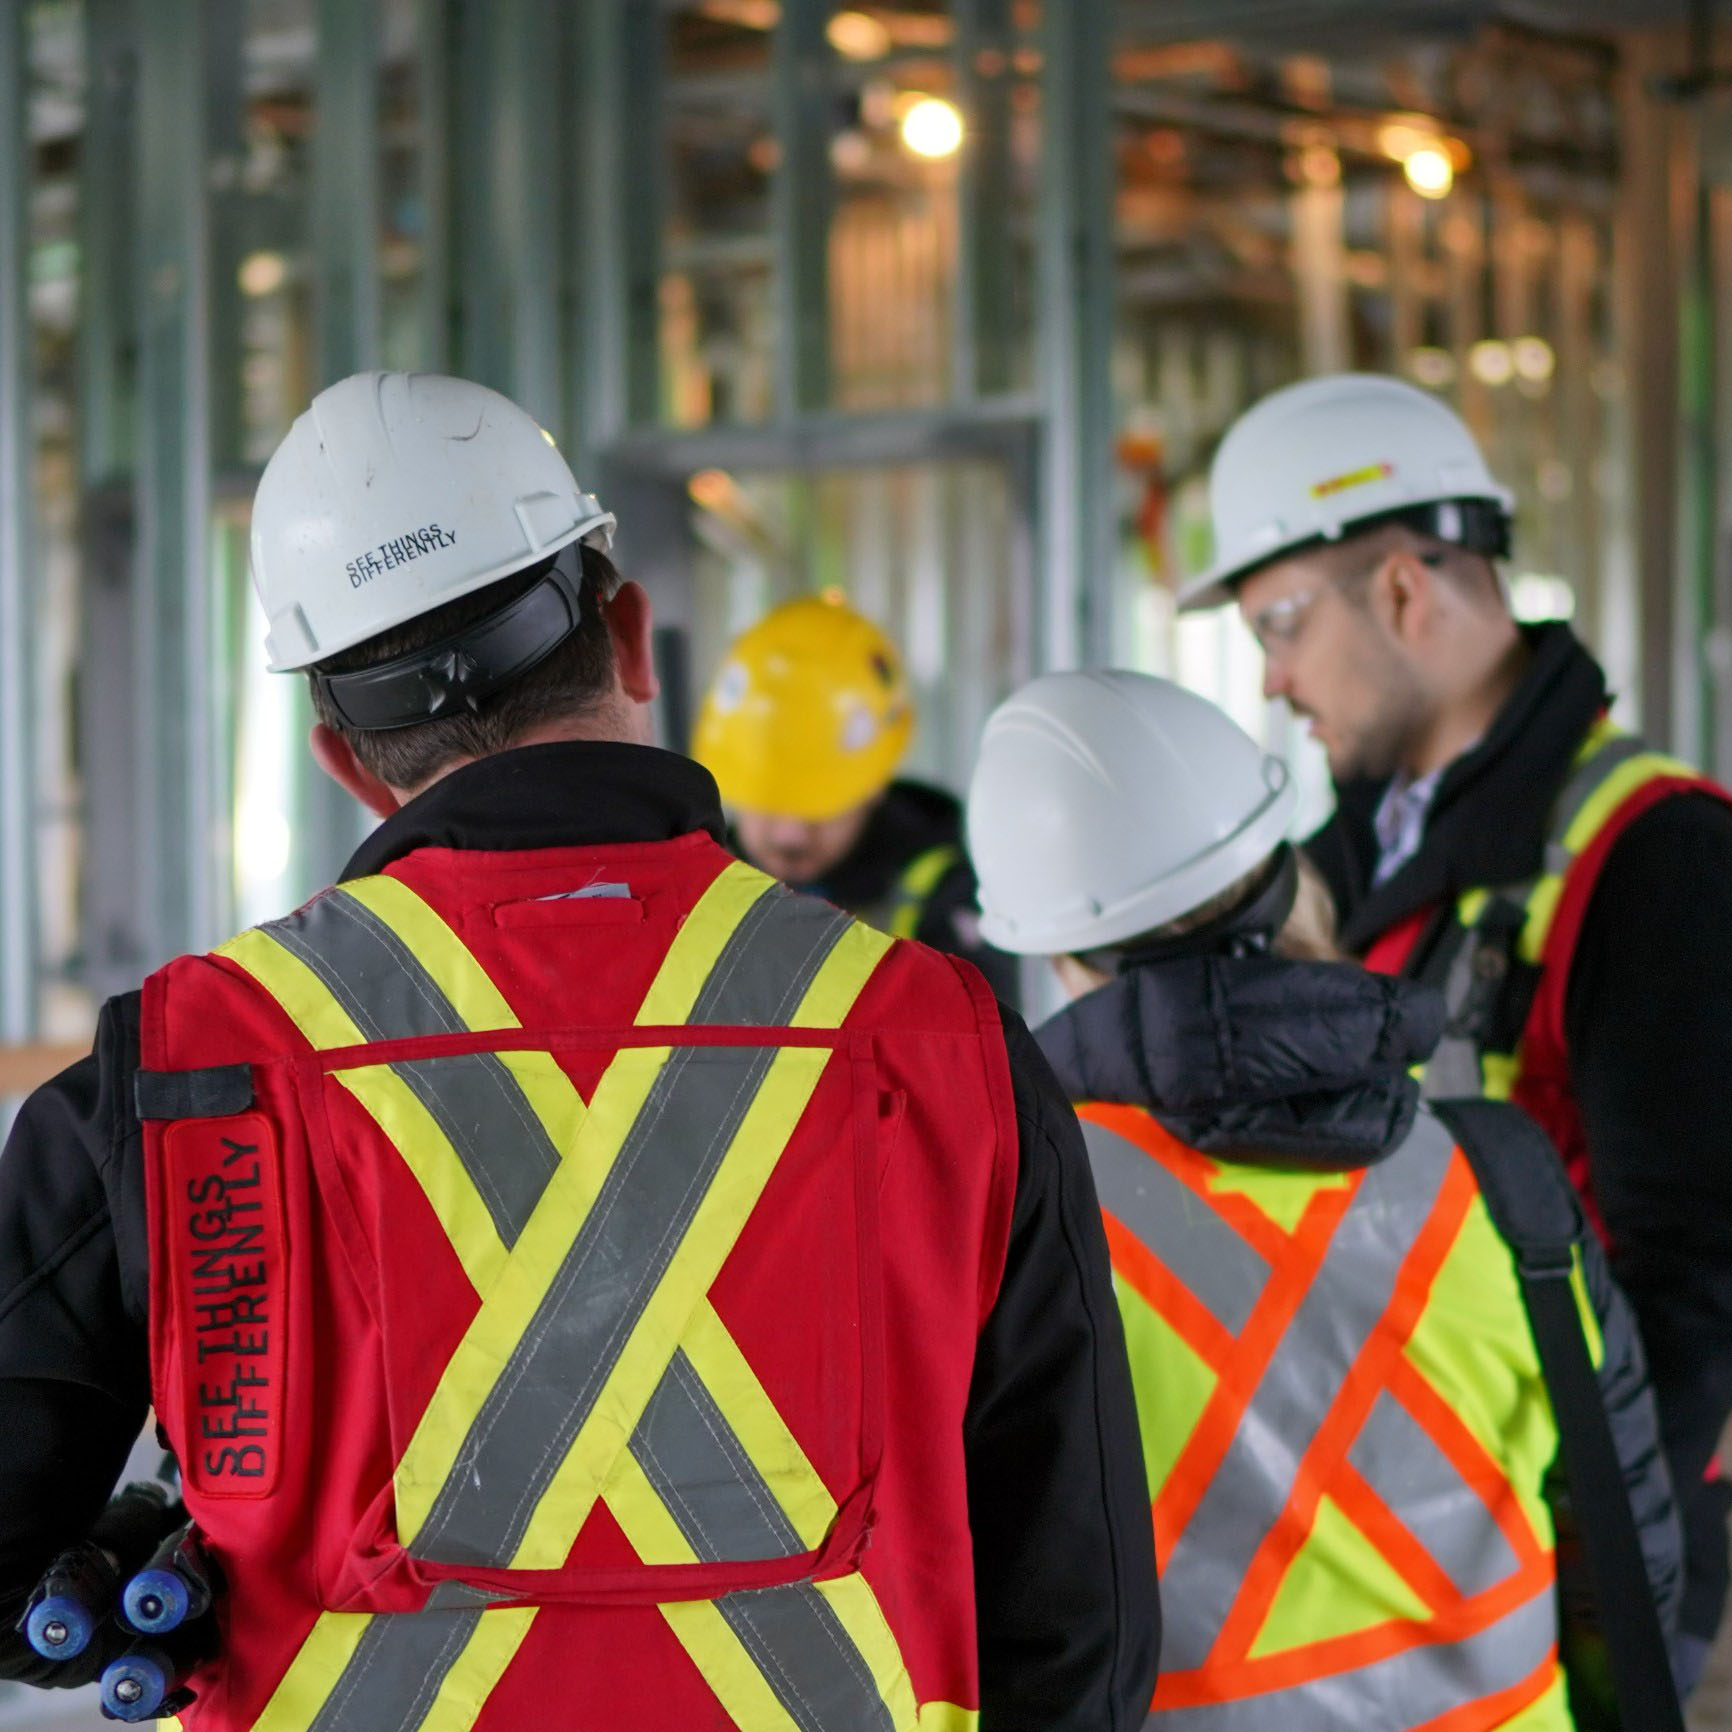 Three Chandos construction workers facing away from the camera, discussing a site on project, wearing safety vests and hard hats that read 